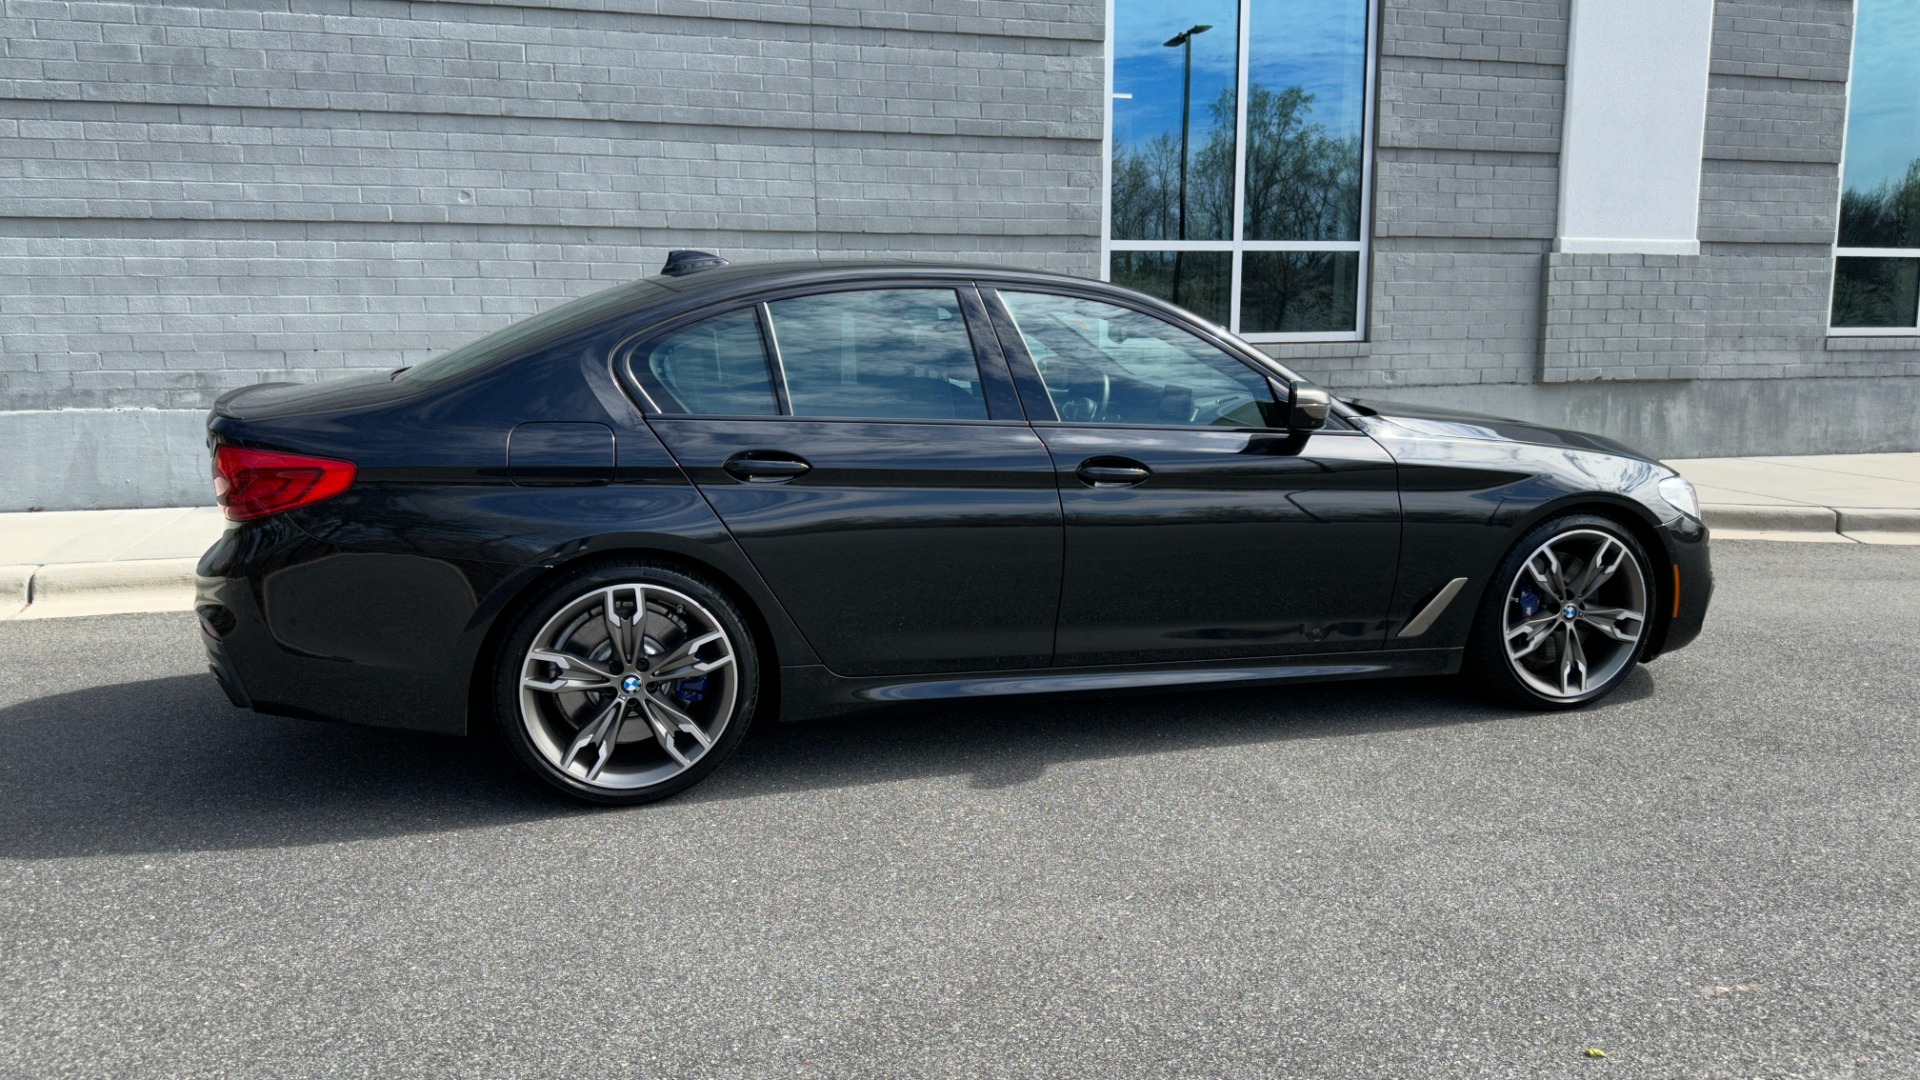 Used 2020 BMW 5 Series M550i xDrive / 20IN WHEELS/ DRIVE ASSIST PLUS / EXECUTIVE PACKAGE / HEATED  for sale $50,495 at Formula Imports in Charlotte NC 28227 6